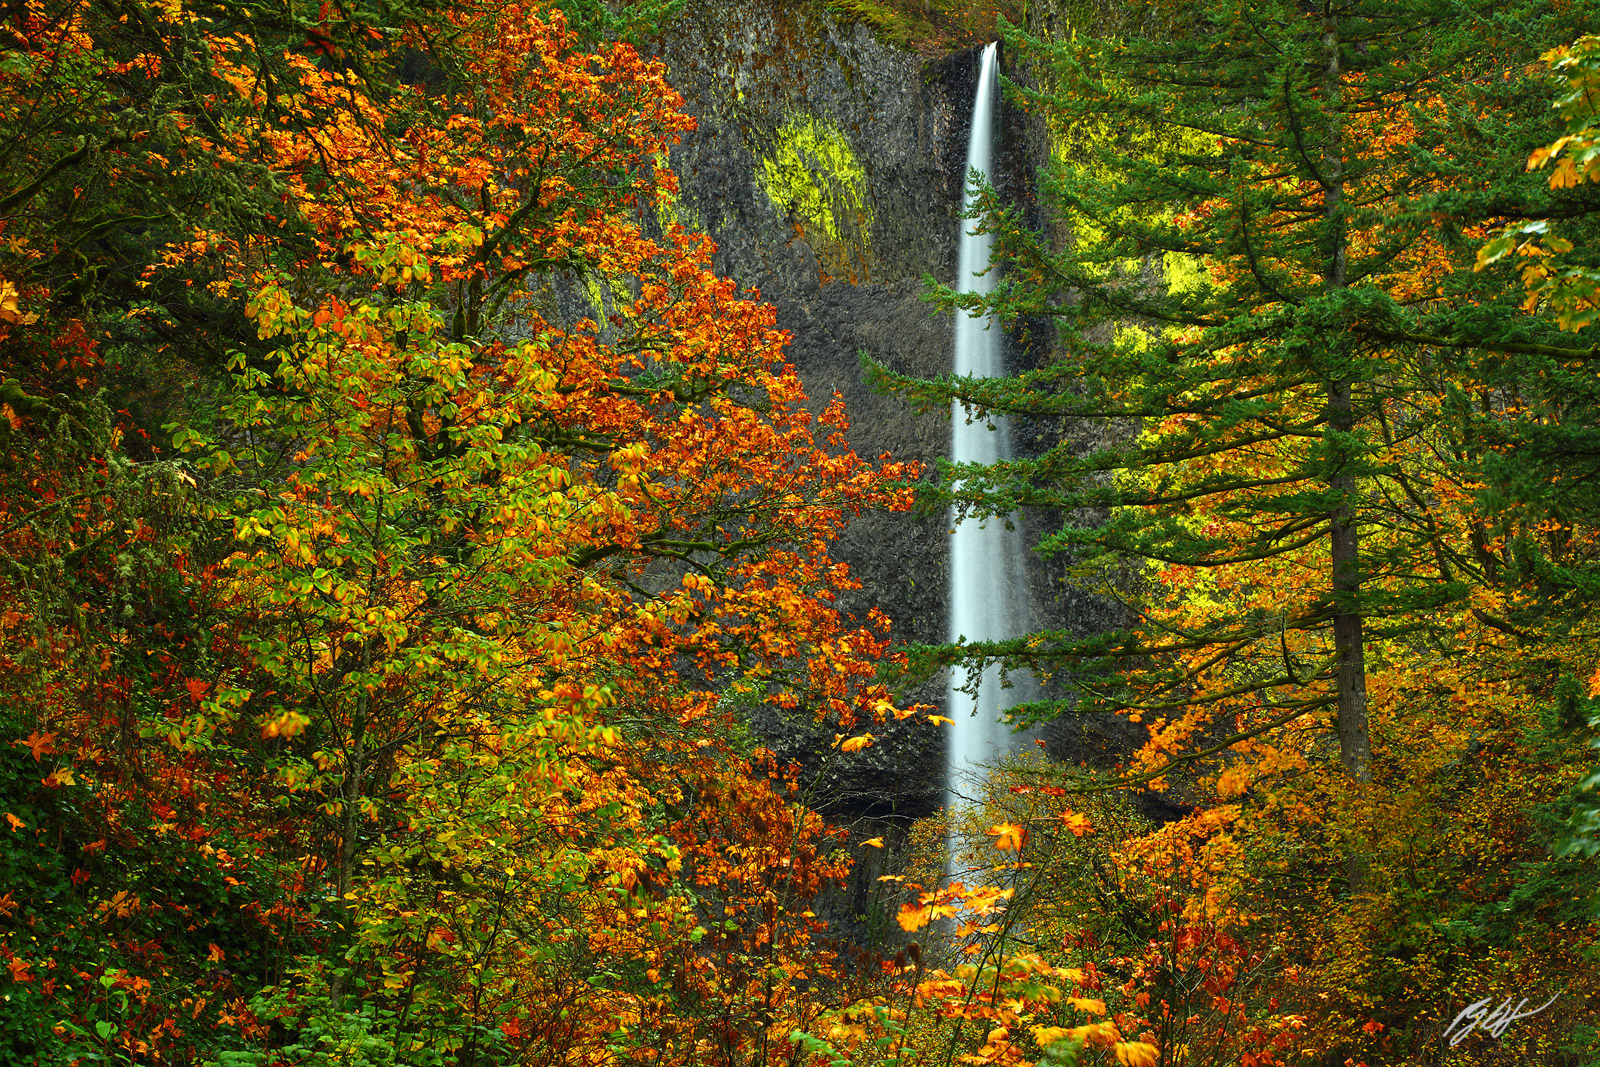 Latourell Falls in the Guy W. Talbot State Park in the Columbia River Gorge National Scenic Area in Oregon